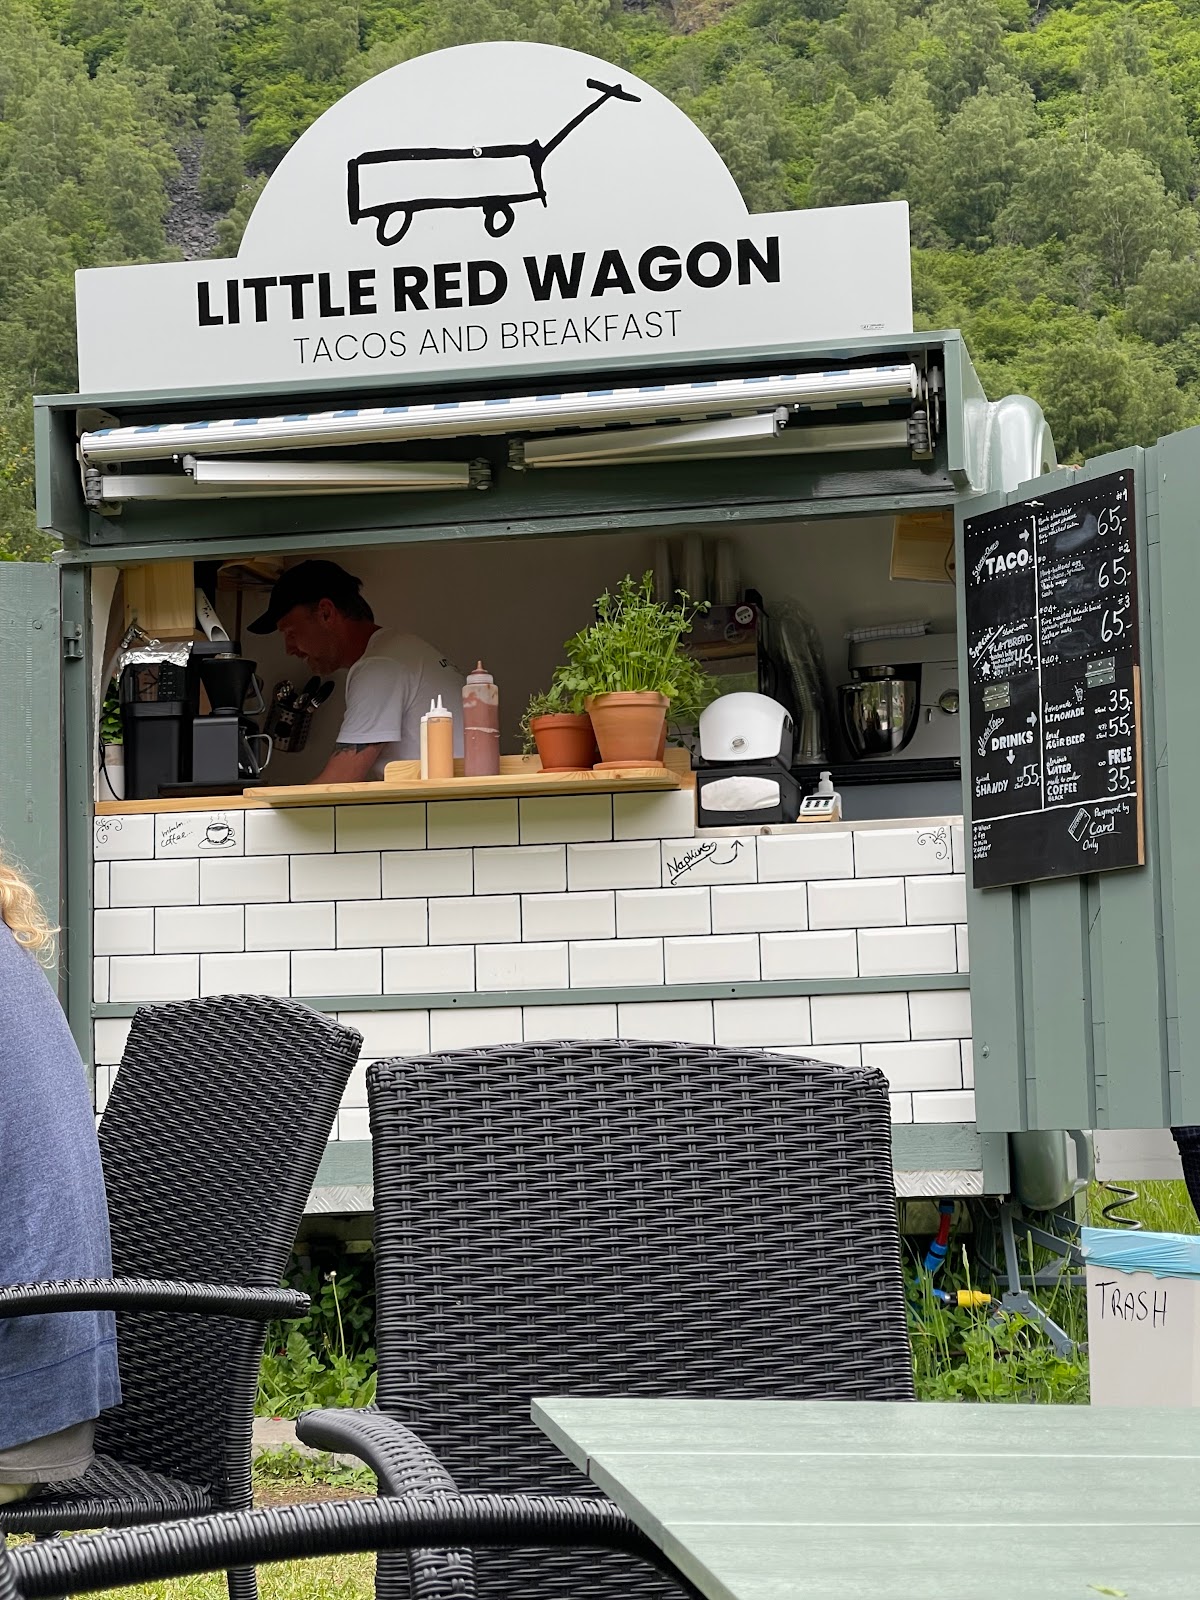 Little Red Wagon - Stone Oven Pizza